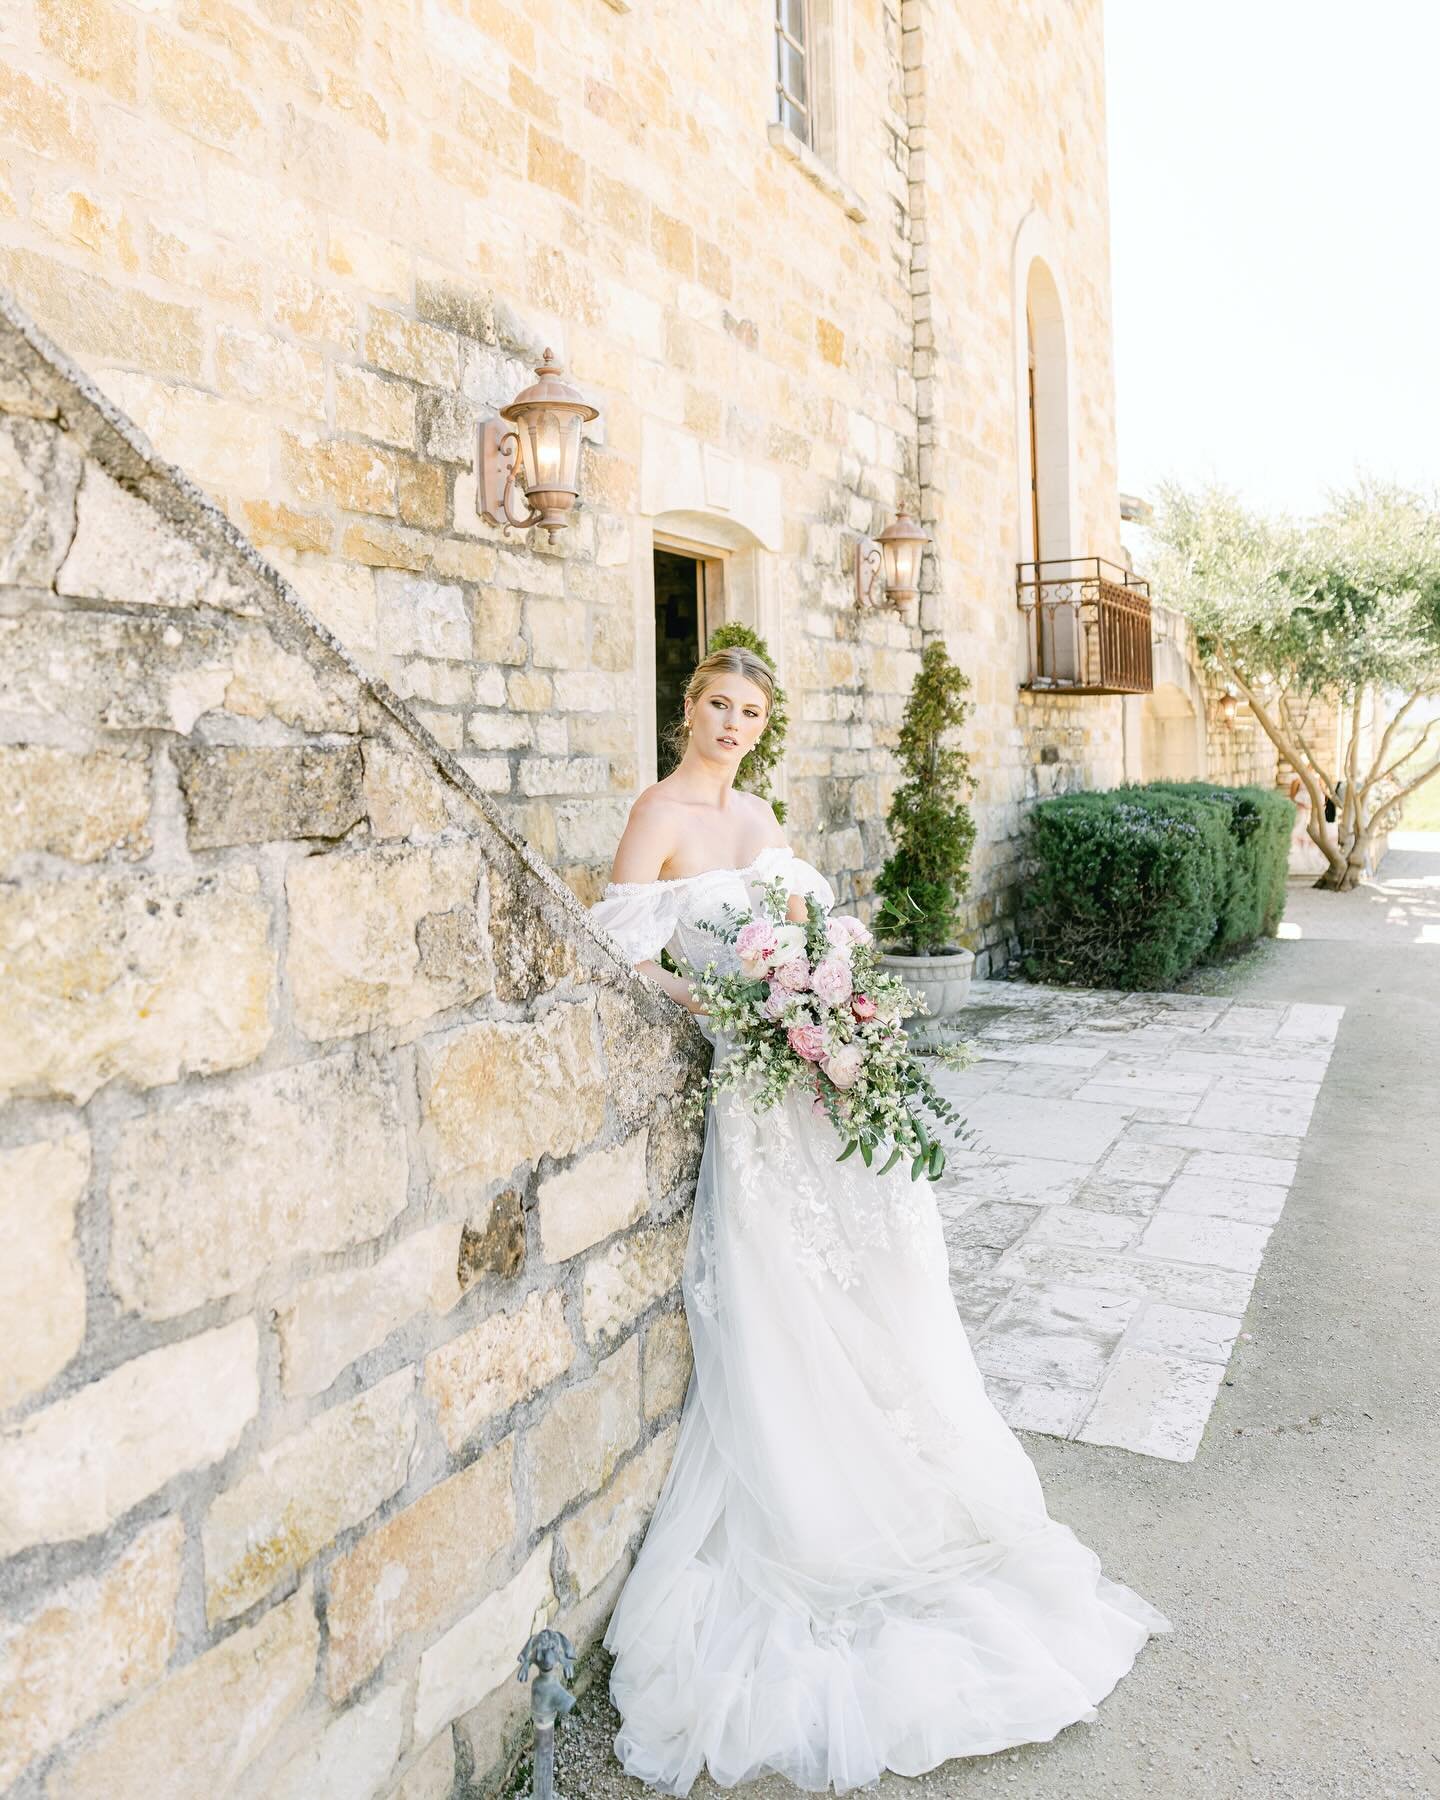 When great light, meets great weather, meets creativity  and gets captured all in one melodious gallery. 

More SoCal wedding spaces like these, please ✨

Photographer @karenvargasphotography 
Venue @sunstonevilla @sunstonewinery 
Planning  @styledsh